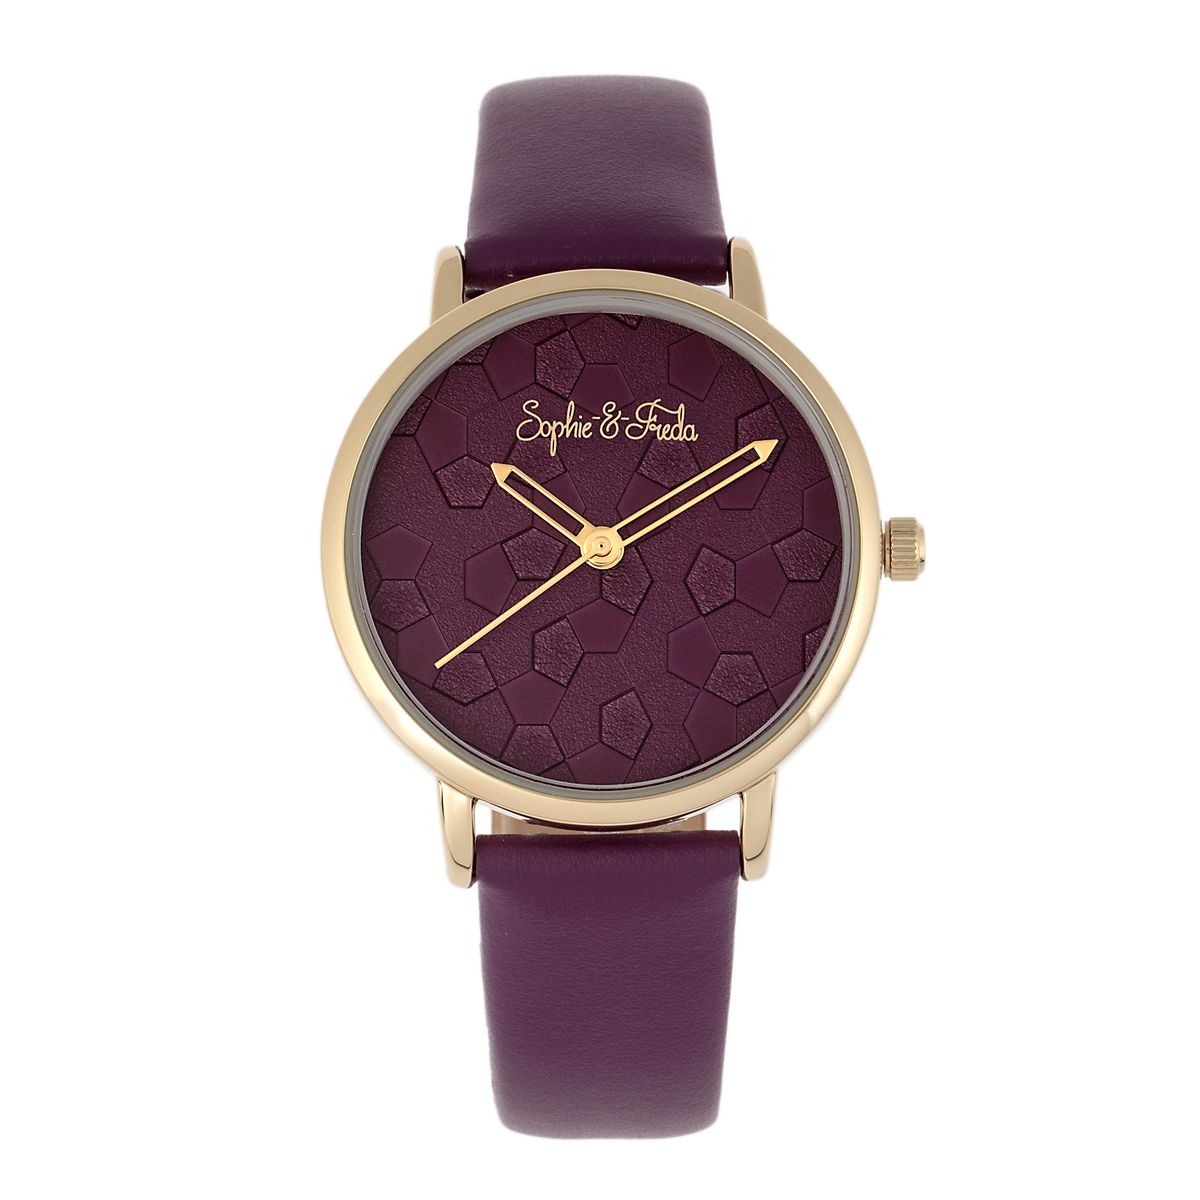 Photos - Wrist Watch Sophie & Freda Sophie & Freda™ Breckenridge Watch with Leather or Stainles